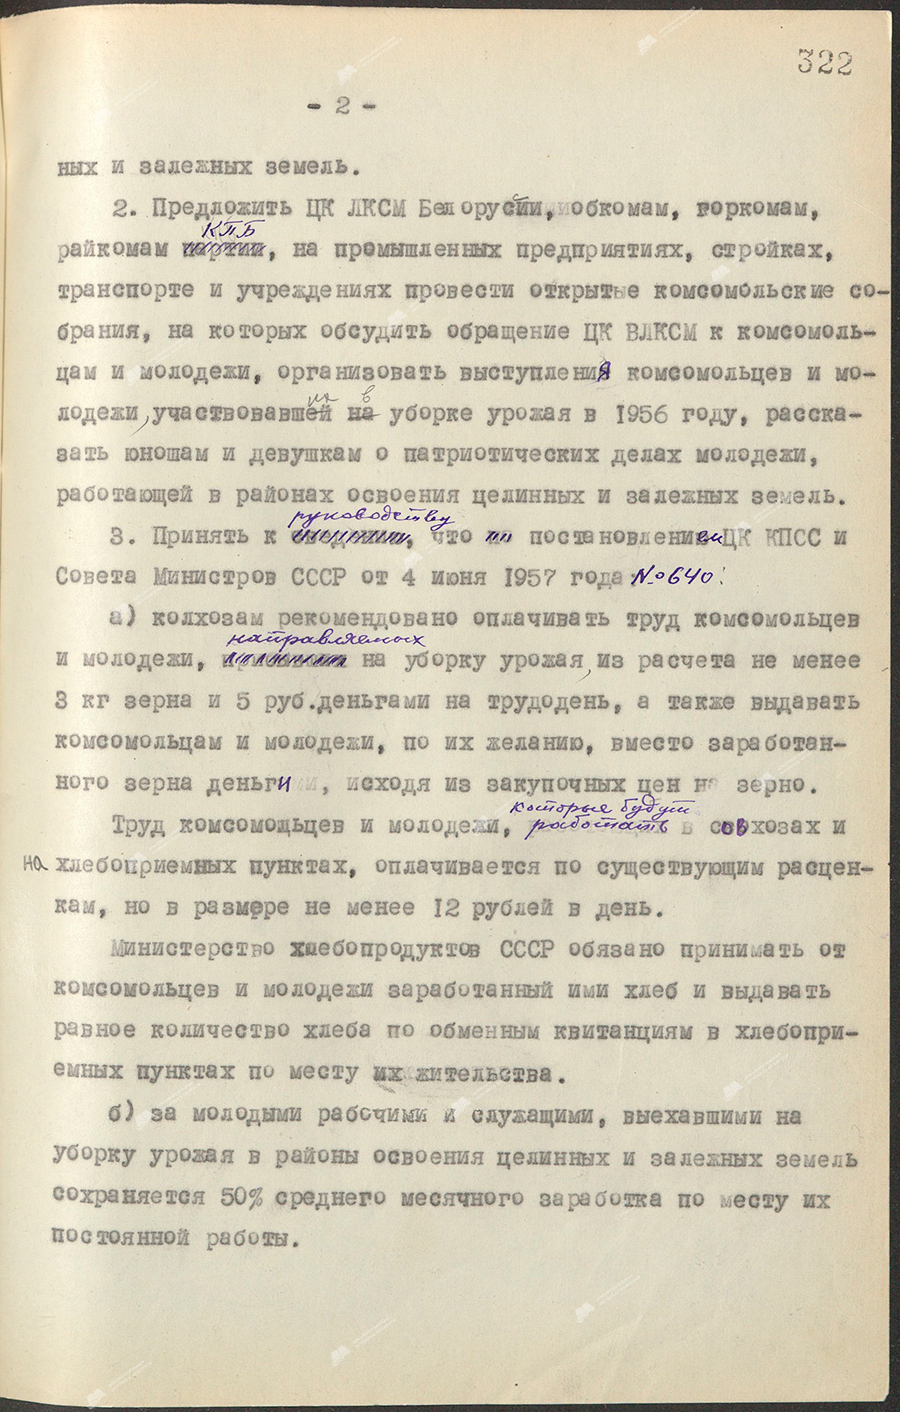 Resolution No. 373 of the Central Committee of the Communist Party of Belarus and the Council of Ministers of the Belarusian SSR «On the participation of Komsomol members and youth of the republic in harvesting in areas of development of virgin and fallow lands in 1957»-стр. 1